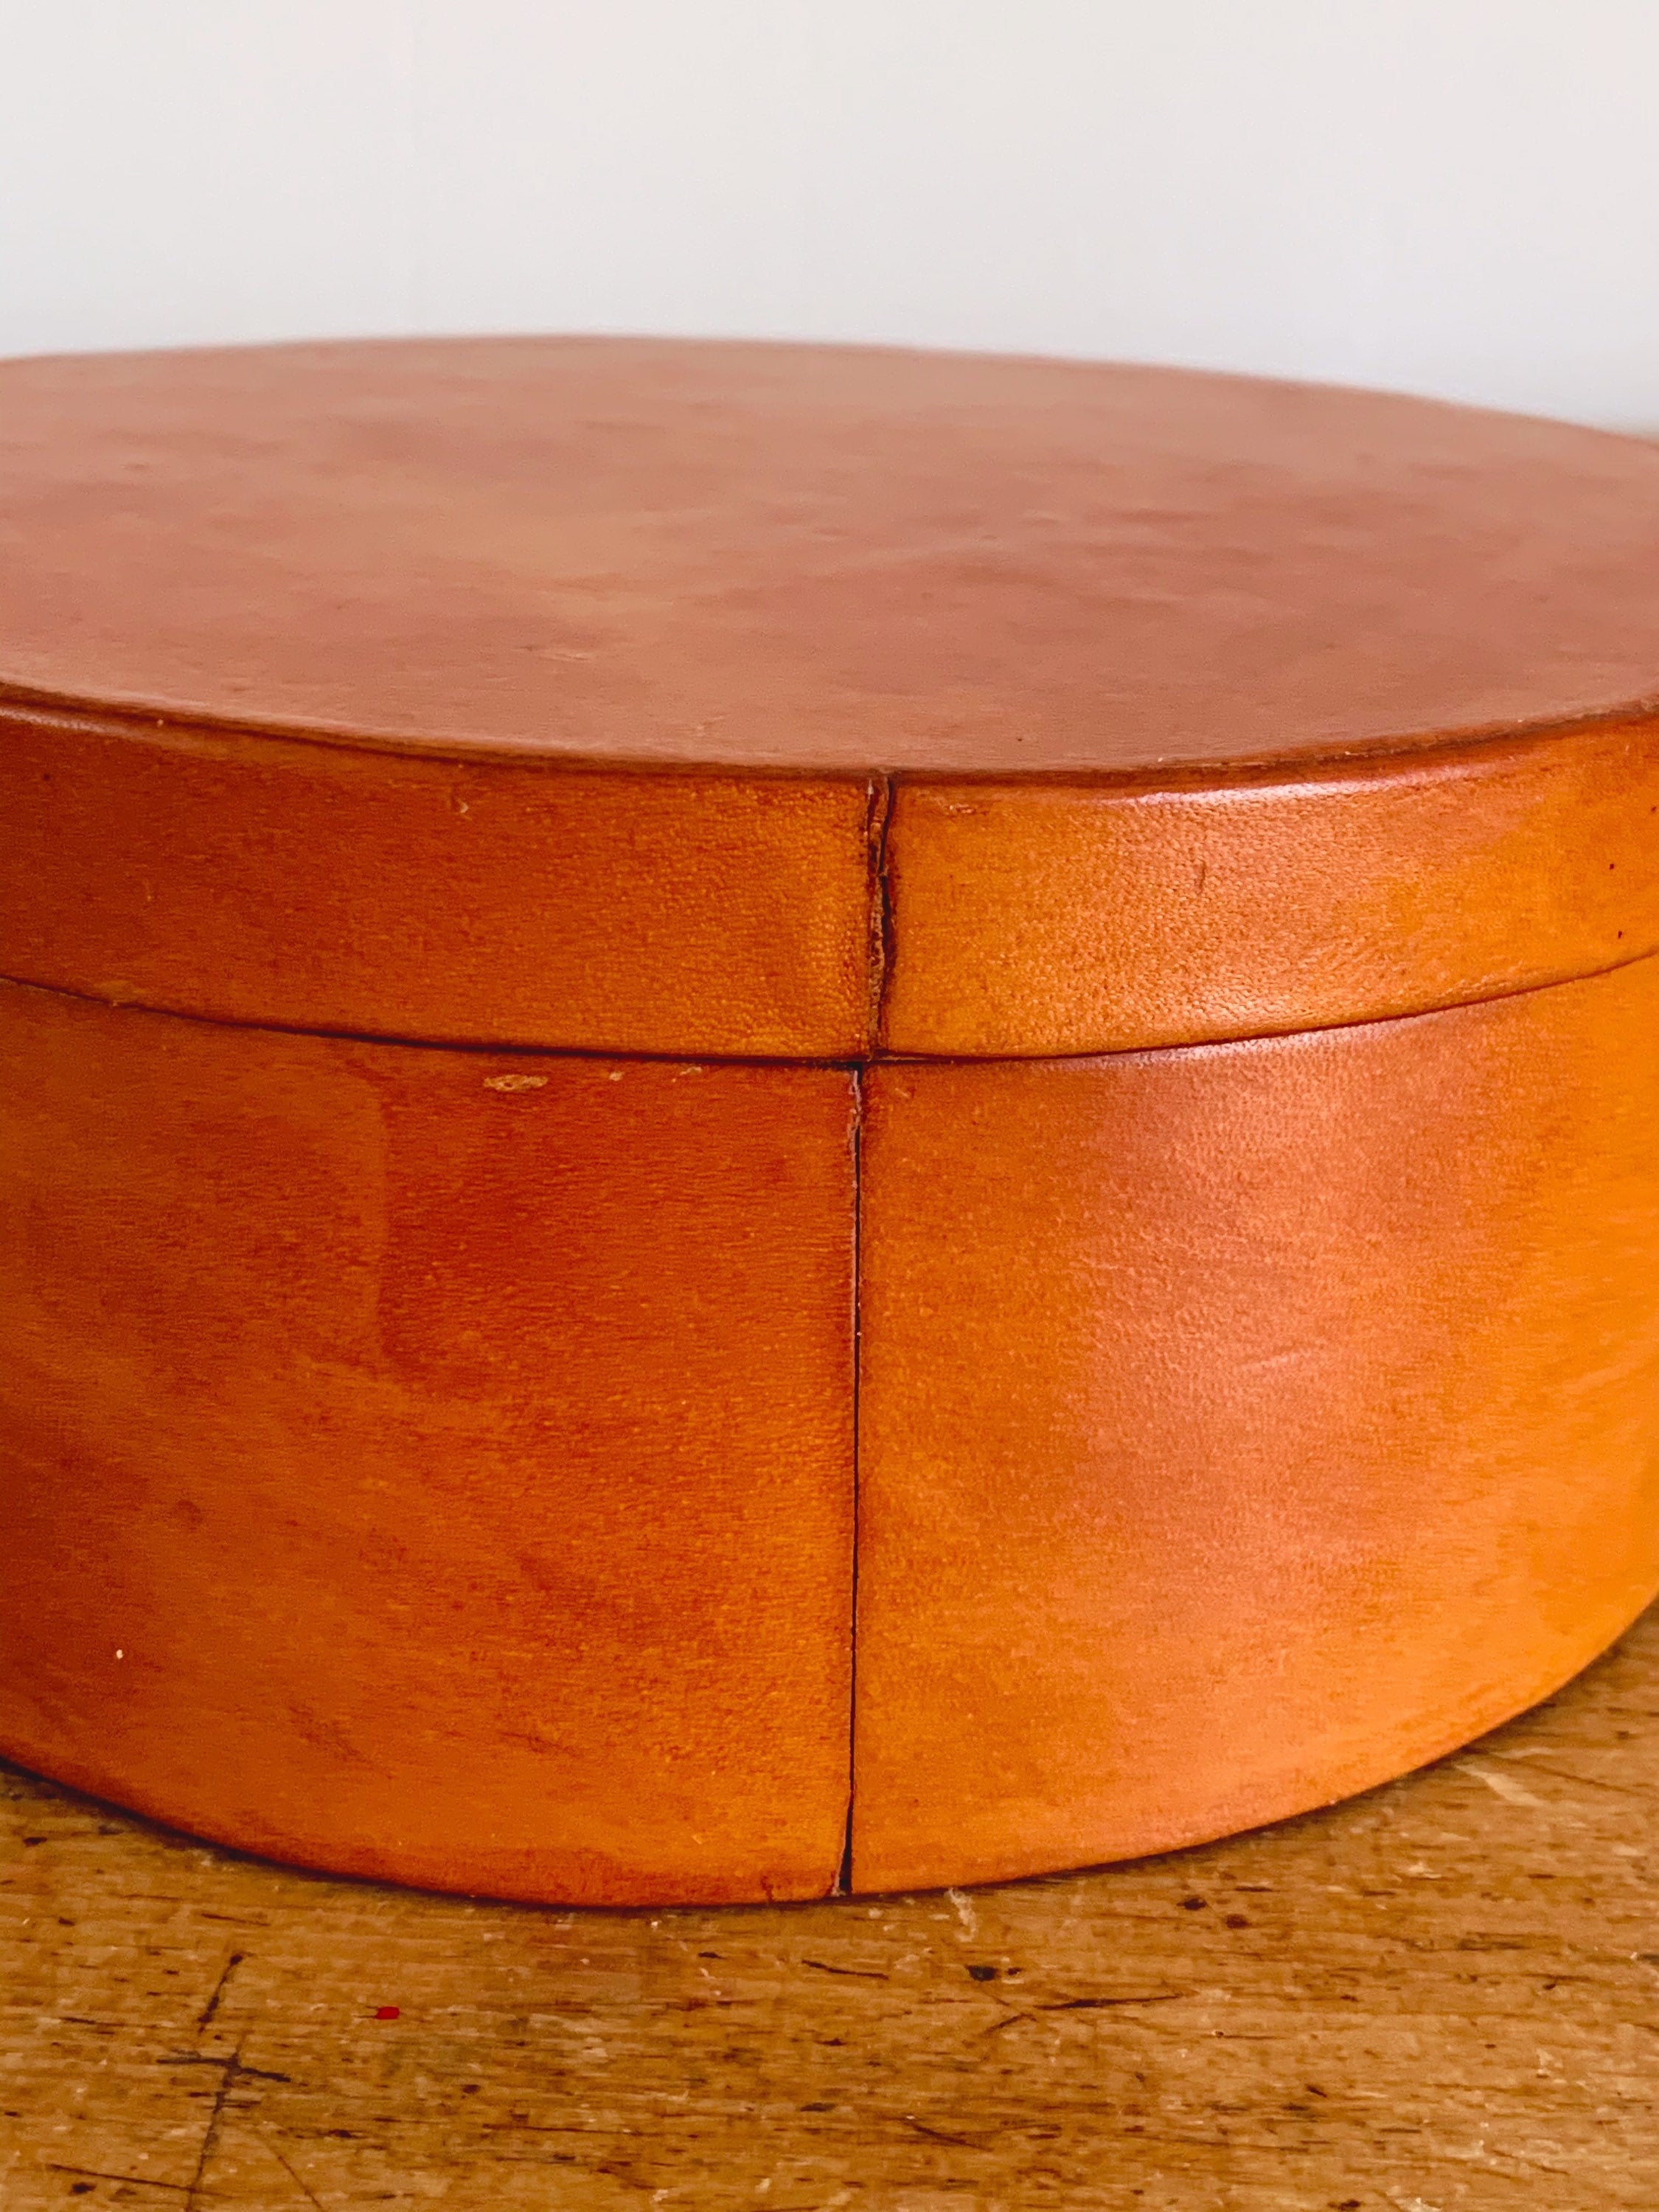 Vintage Leather Covered Wood Round Storage Box with Lid | Home and Office Organization